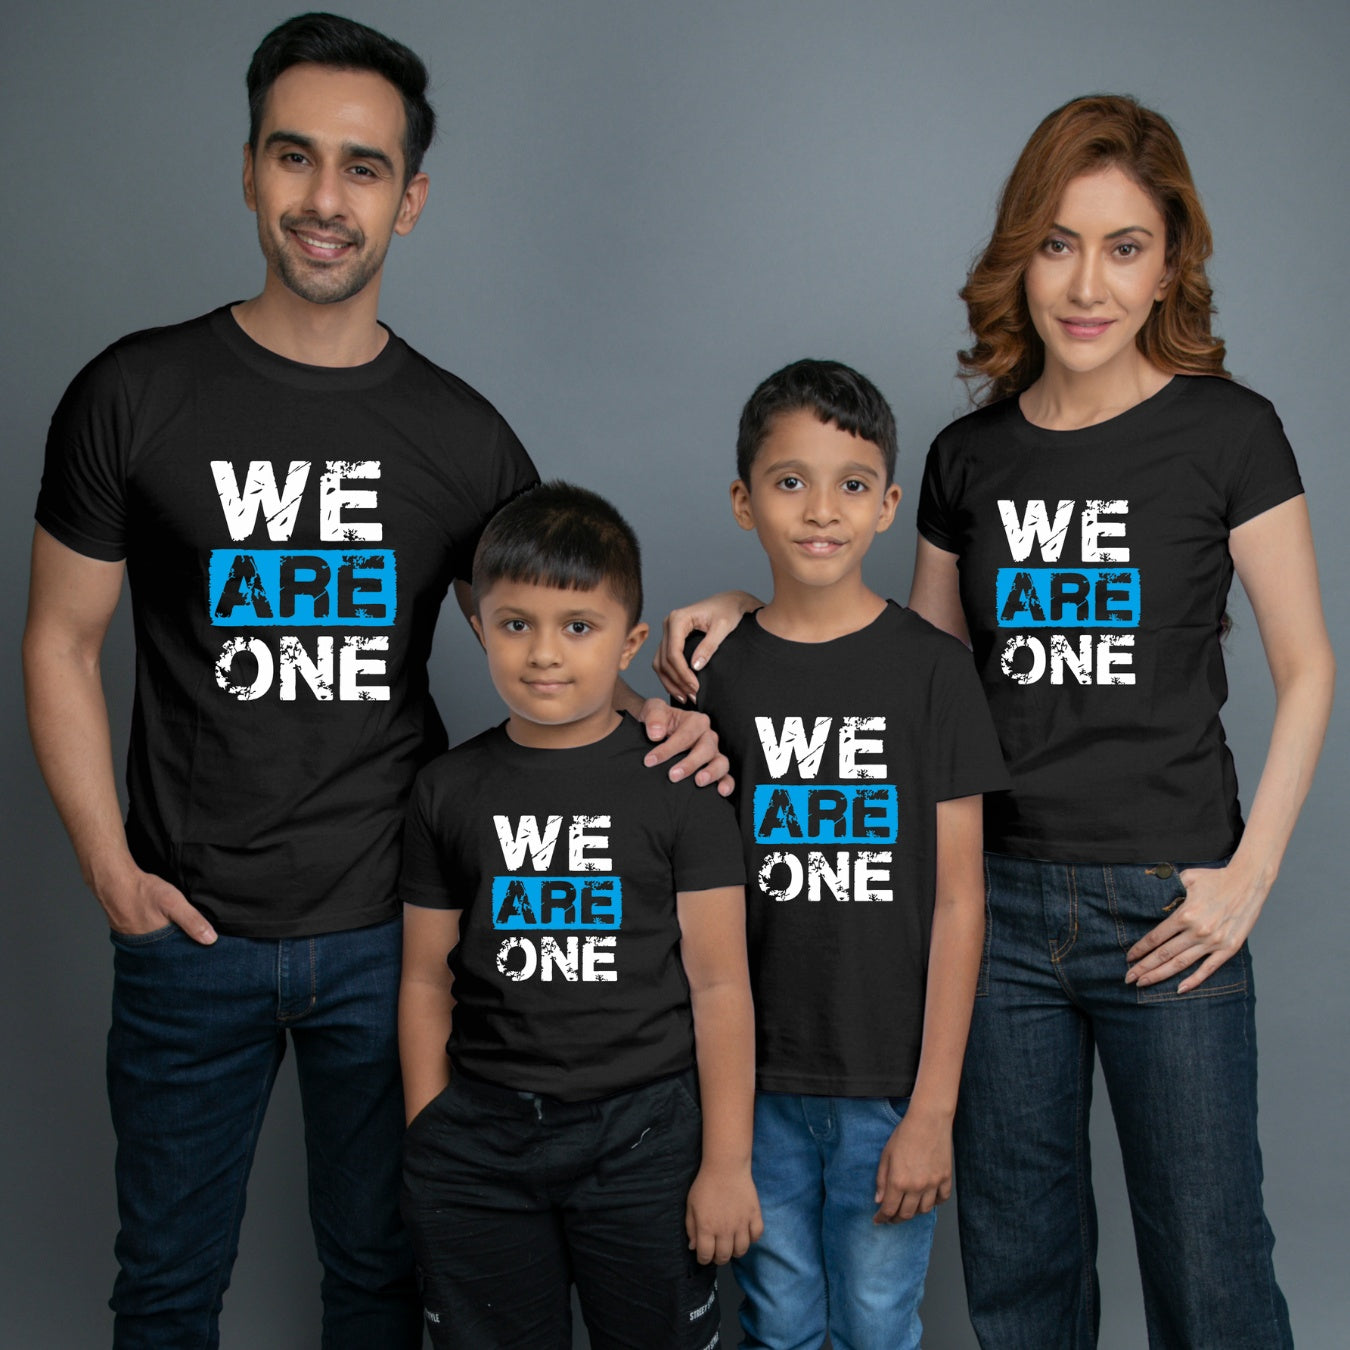 Family t shirts set of 4 Mom Dad Two Sons in Black Colour - We Are One Variant